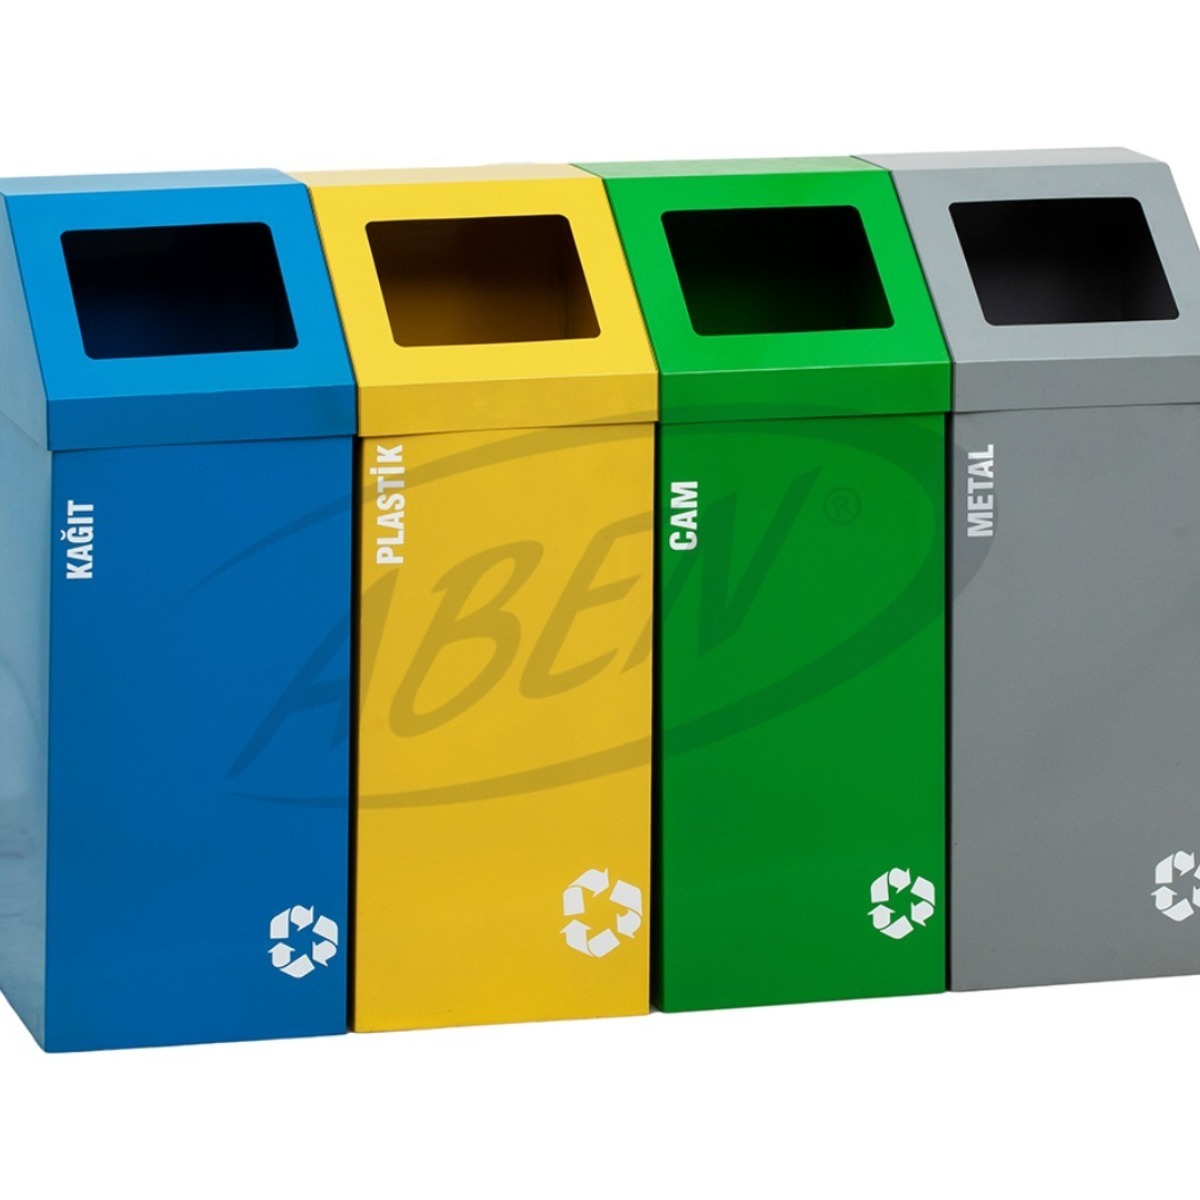 AB-742 4'Part Recycle Bin product logo